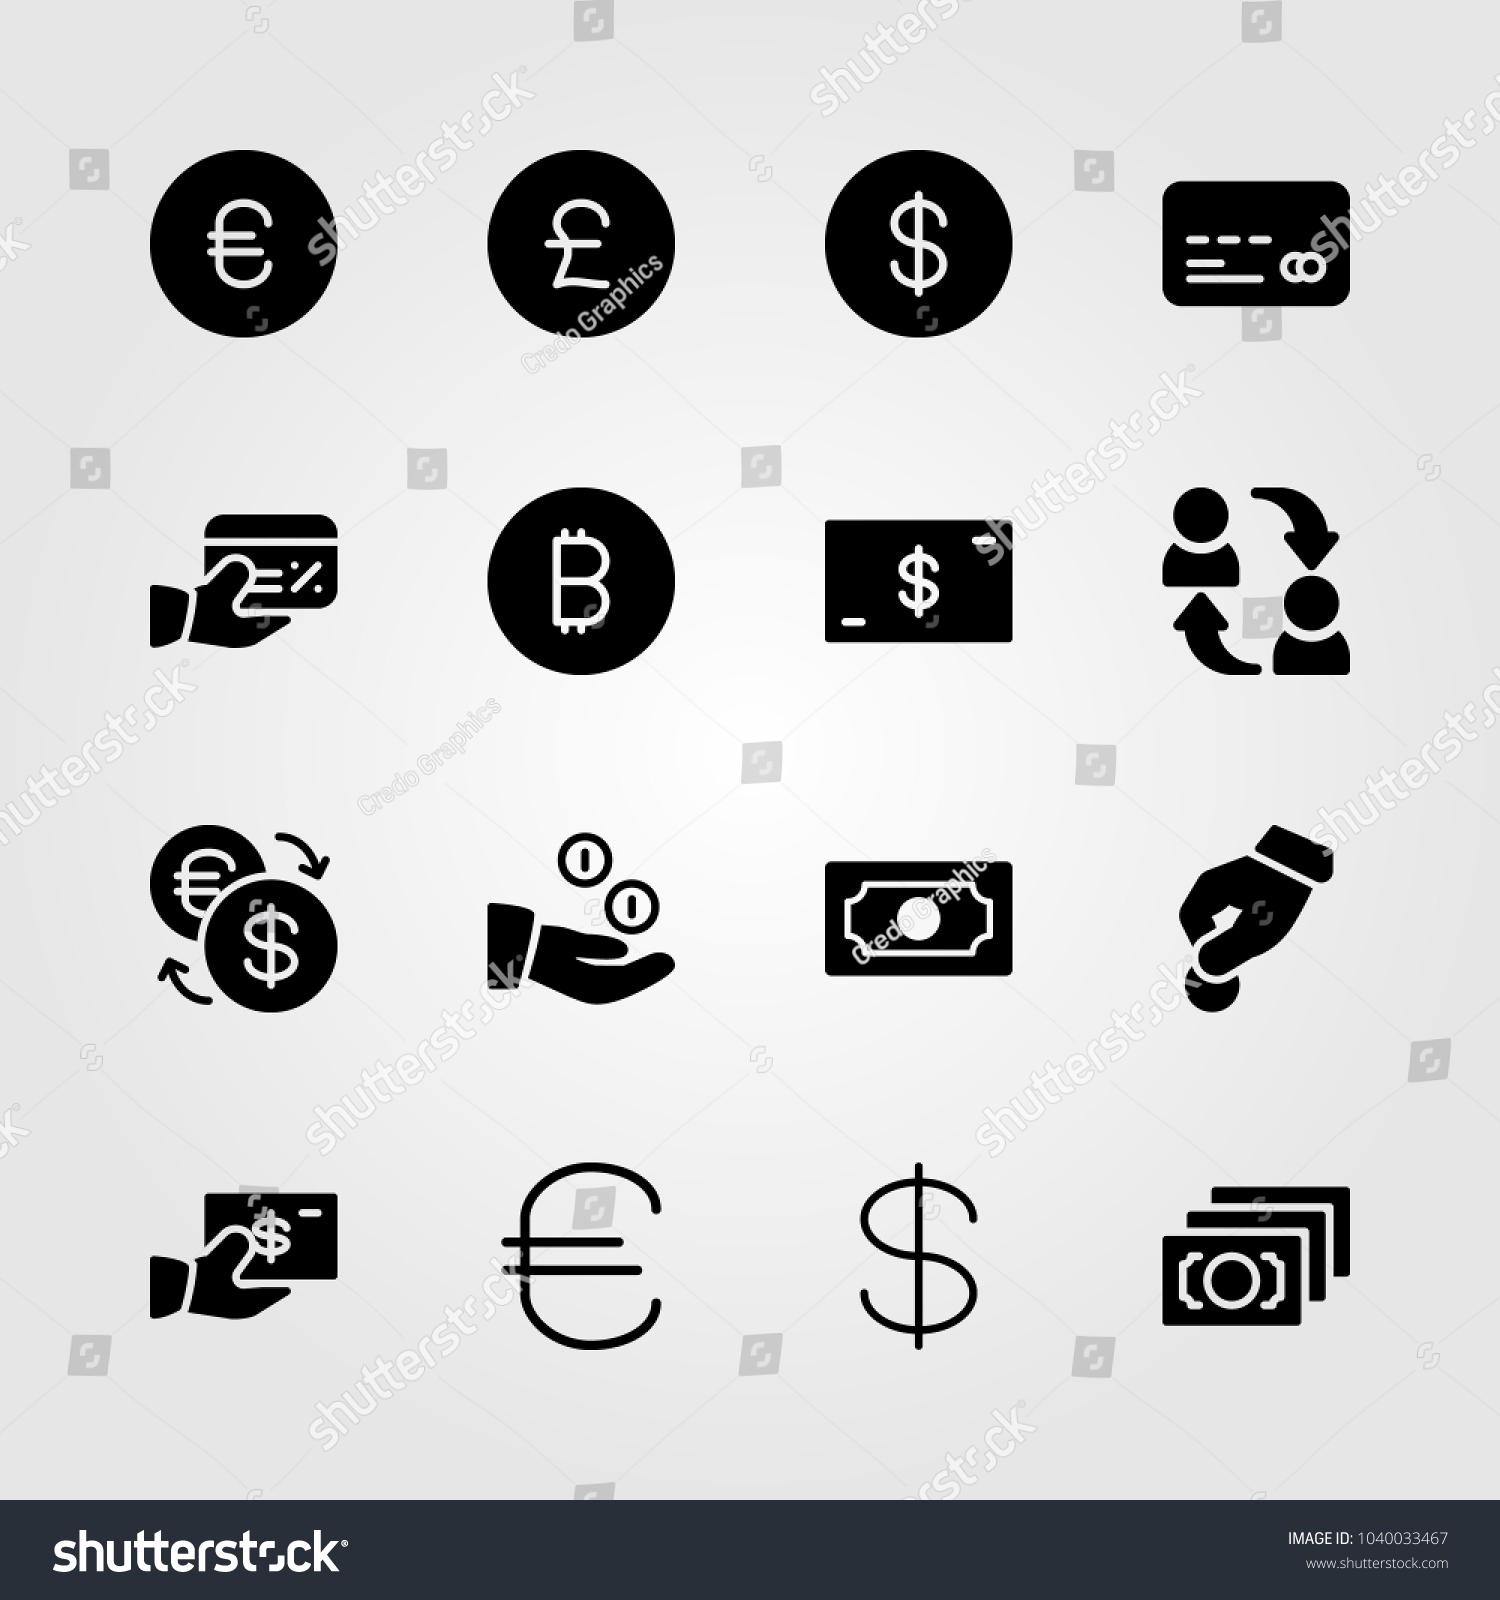 Bank icons set. Vector illustration exchange, dollar, euro and coins #1040033467